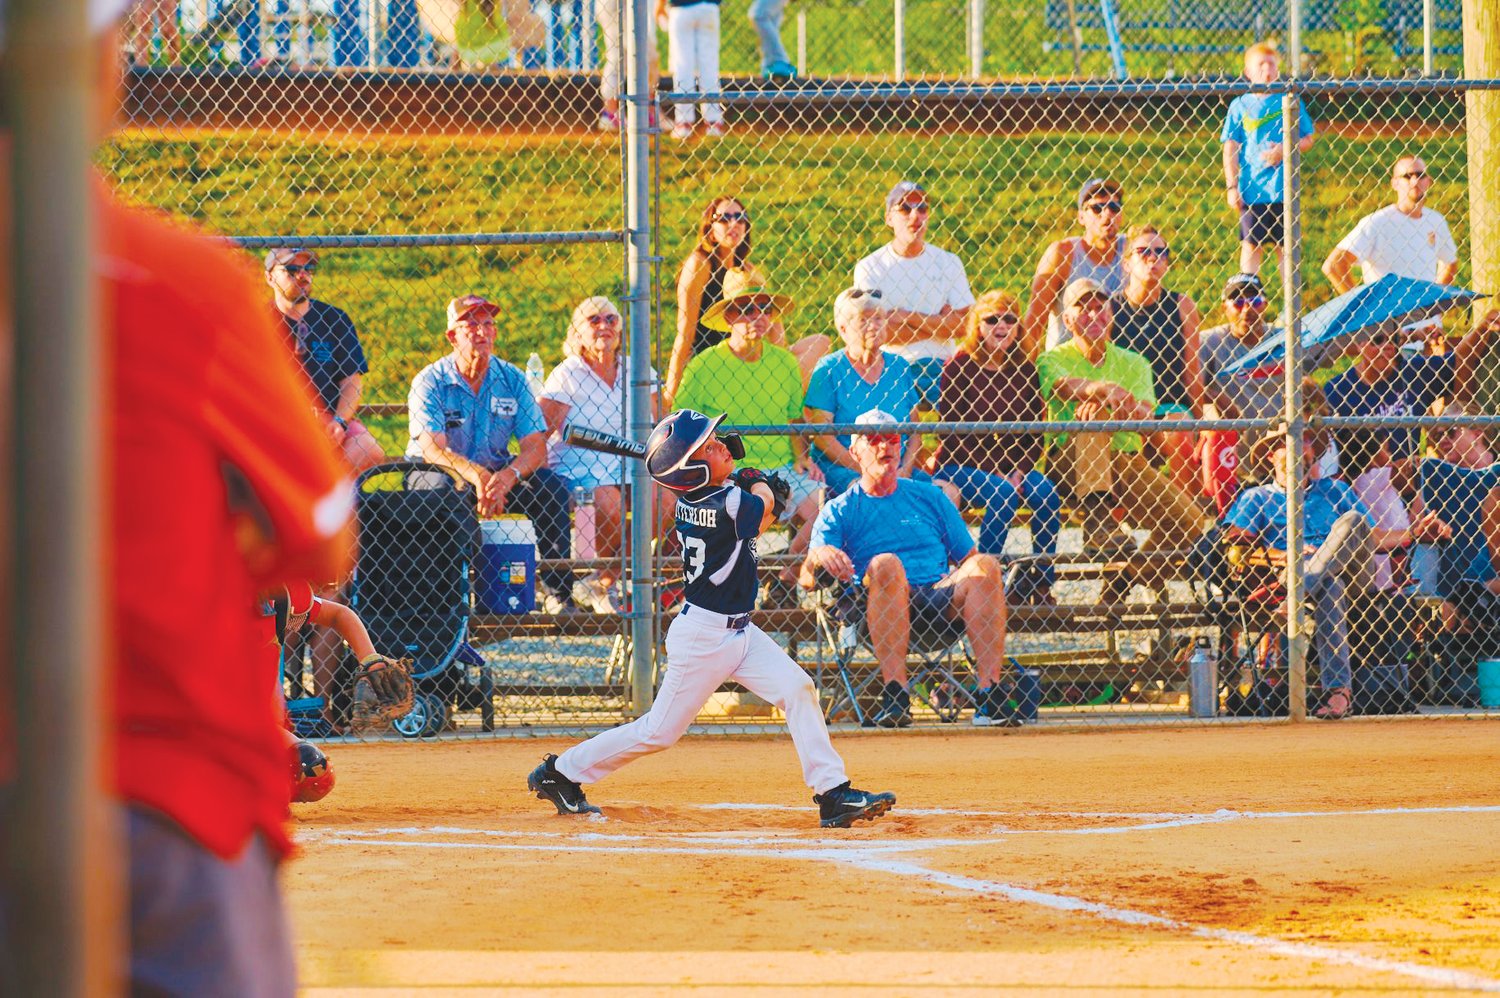 East Chatham's Dylan Lutterloh (center) swings for the fences in his team's 16-7 loss to Davie County in the N.C. Little League District 2 tournament on June 22. East Chatham downed Davie the following night, 23-2, to win the district title.